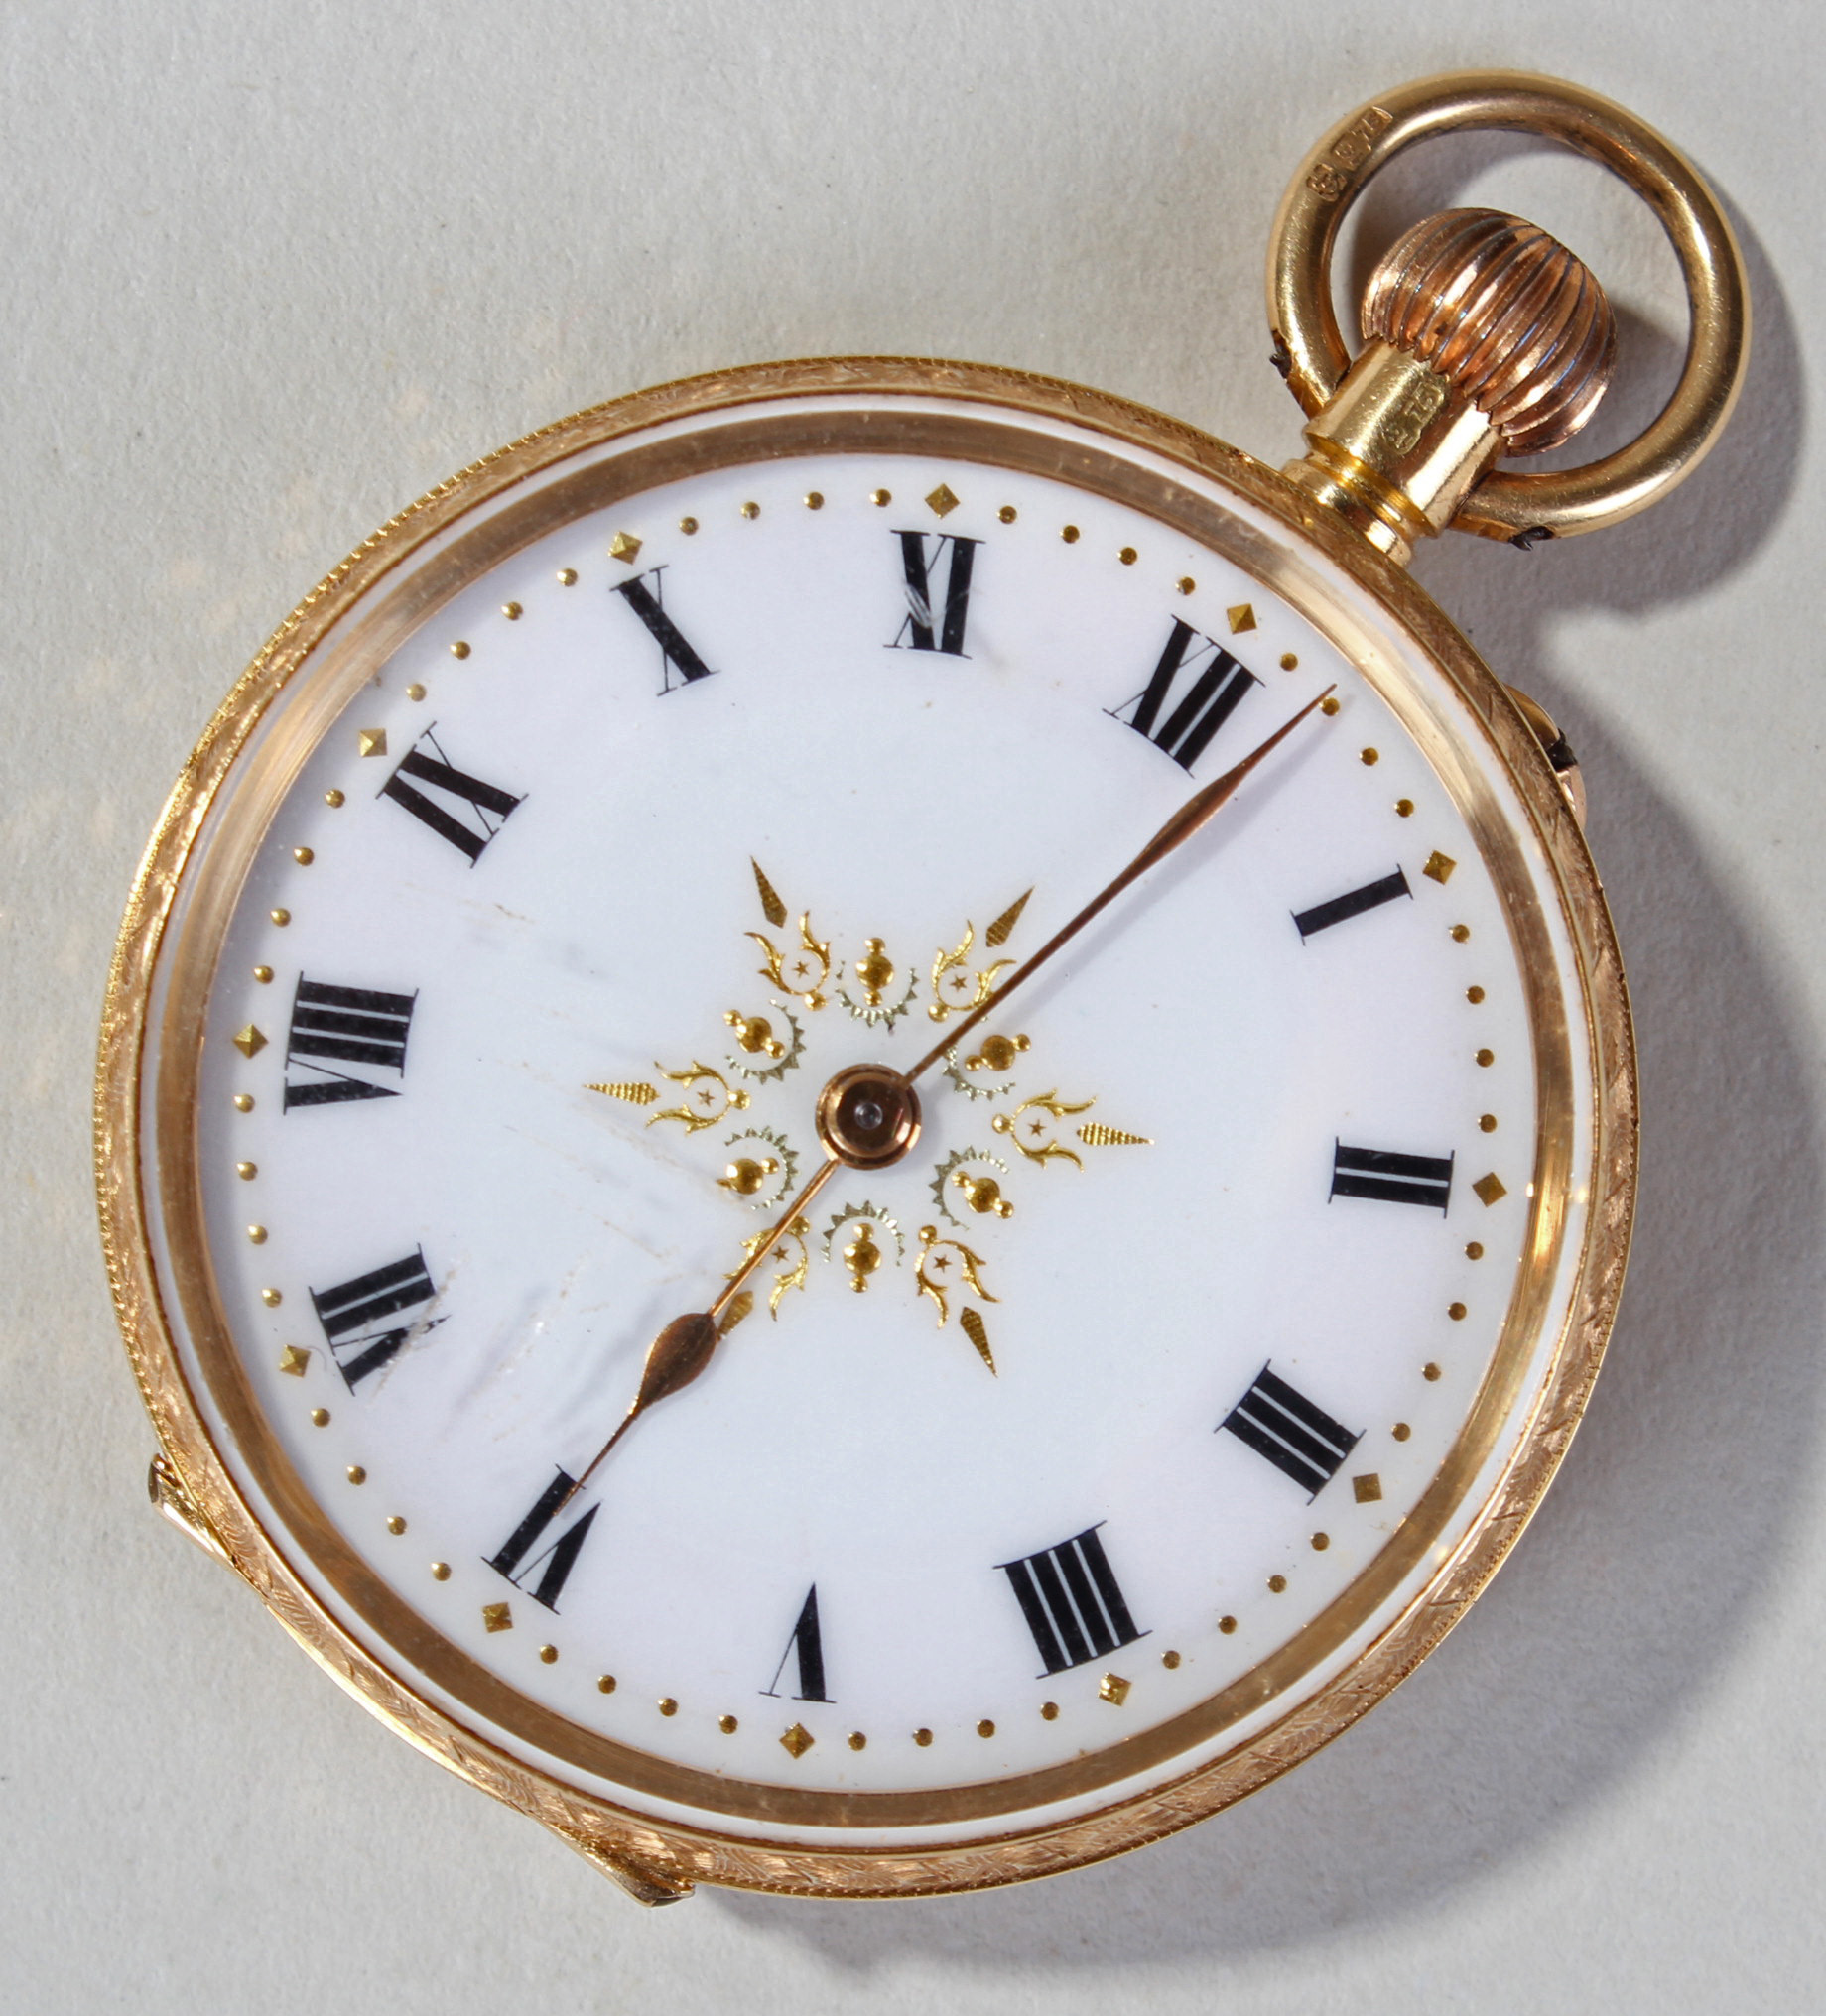 18ct gold ladies fob watch, the white and yellow enamel dial having black roman numerals surrounded